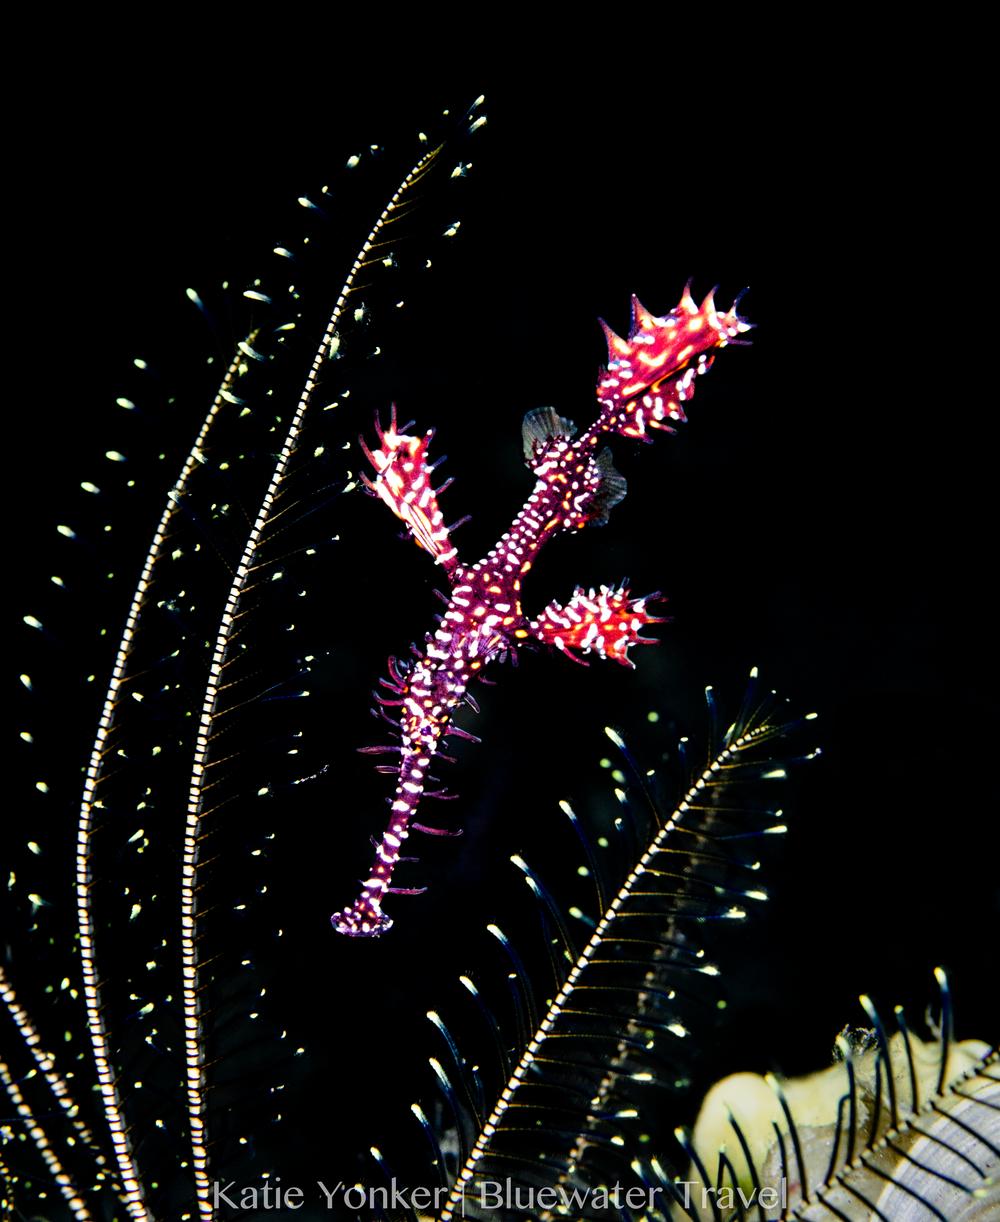 An ornate ghost pipefish in Papua New Guinea